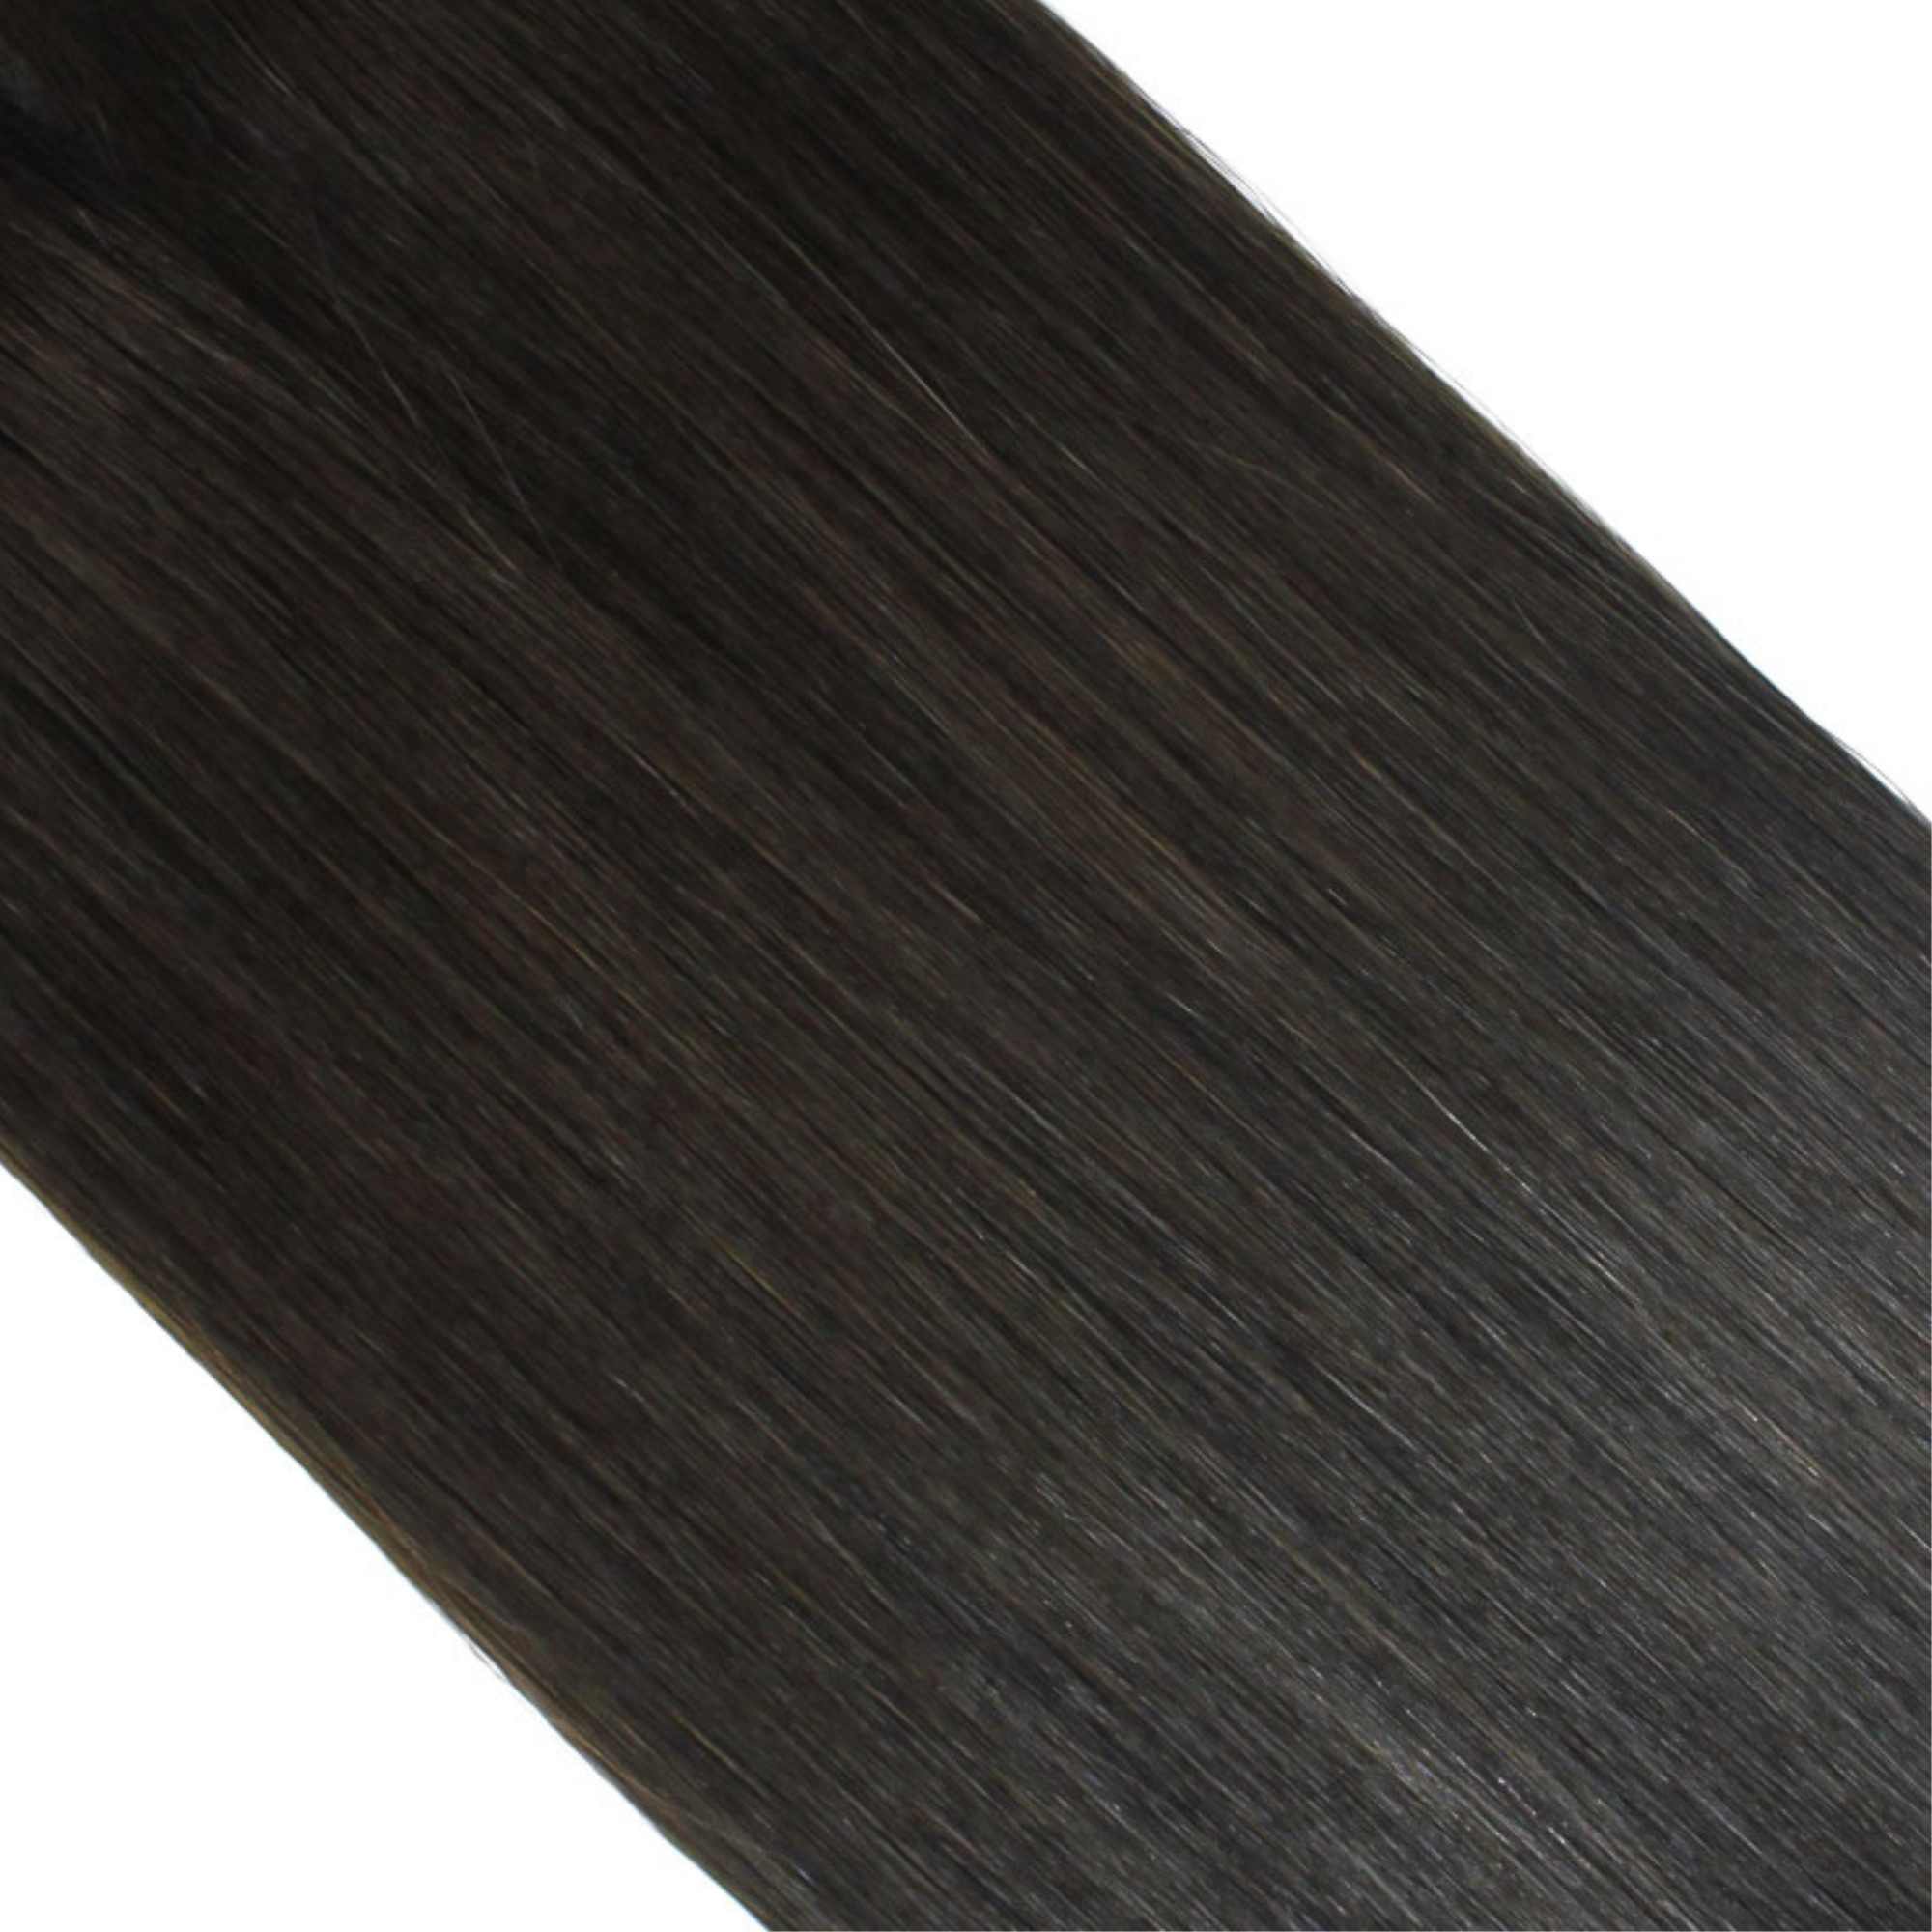 "hair rehab london 18" length 120 grams weight original clip-in hair extensions shade titled hshow stopper"